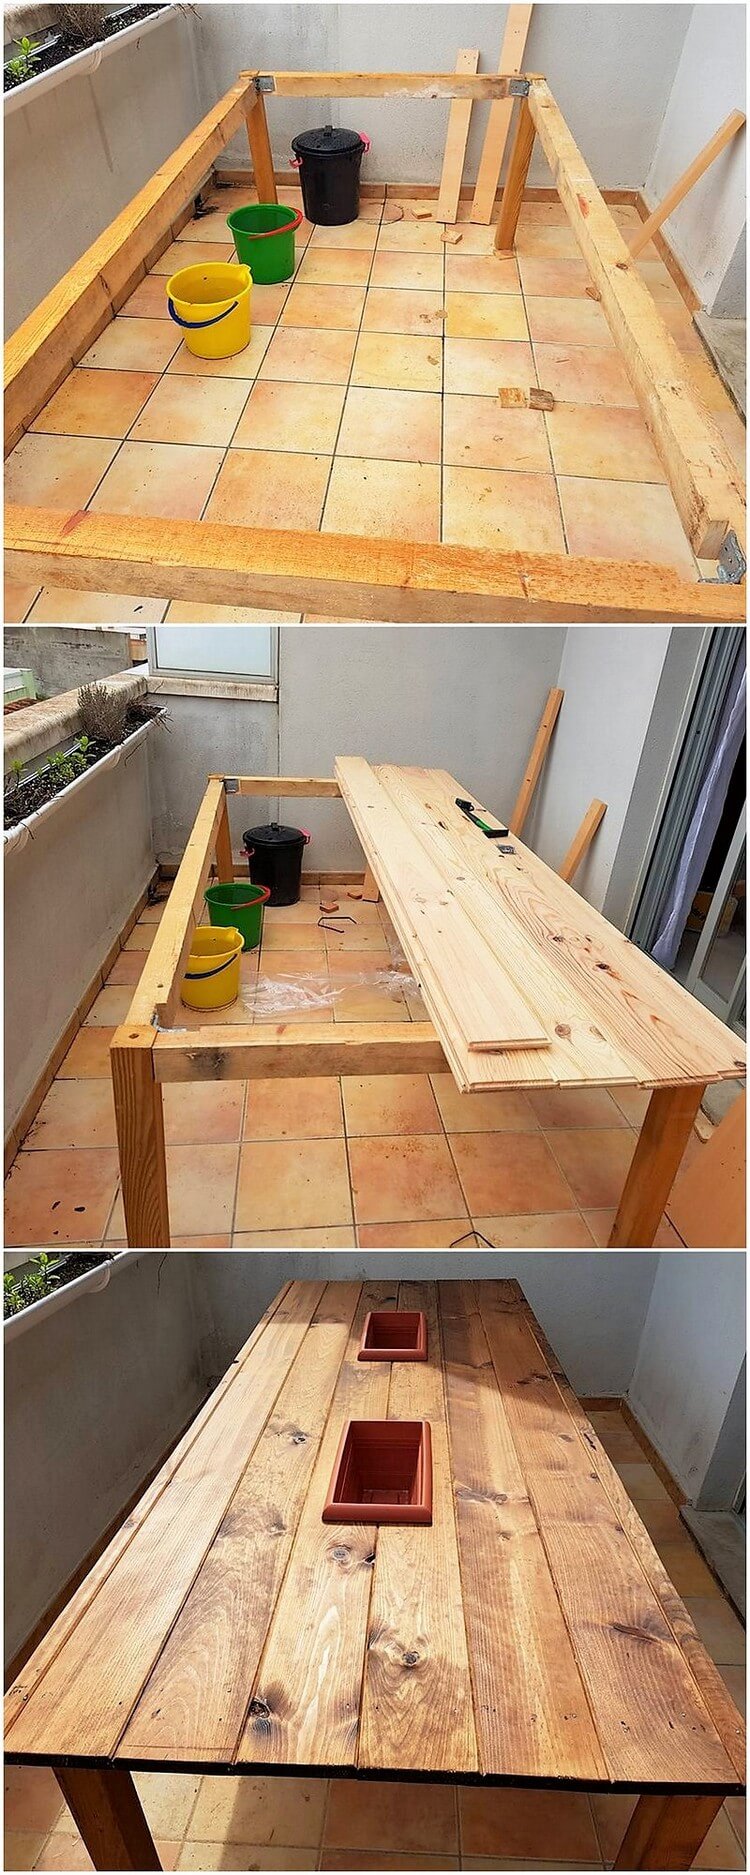 Pallet Table with Wine Storage